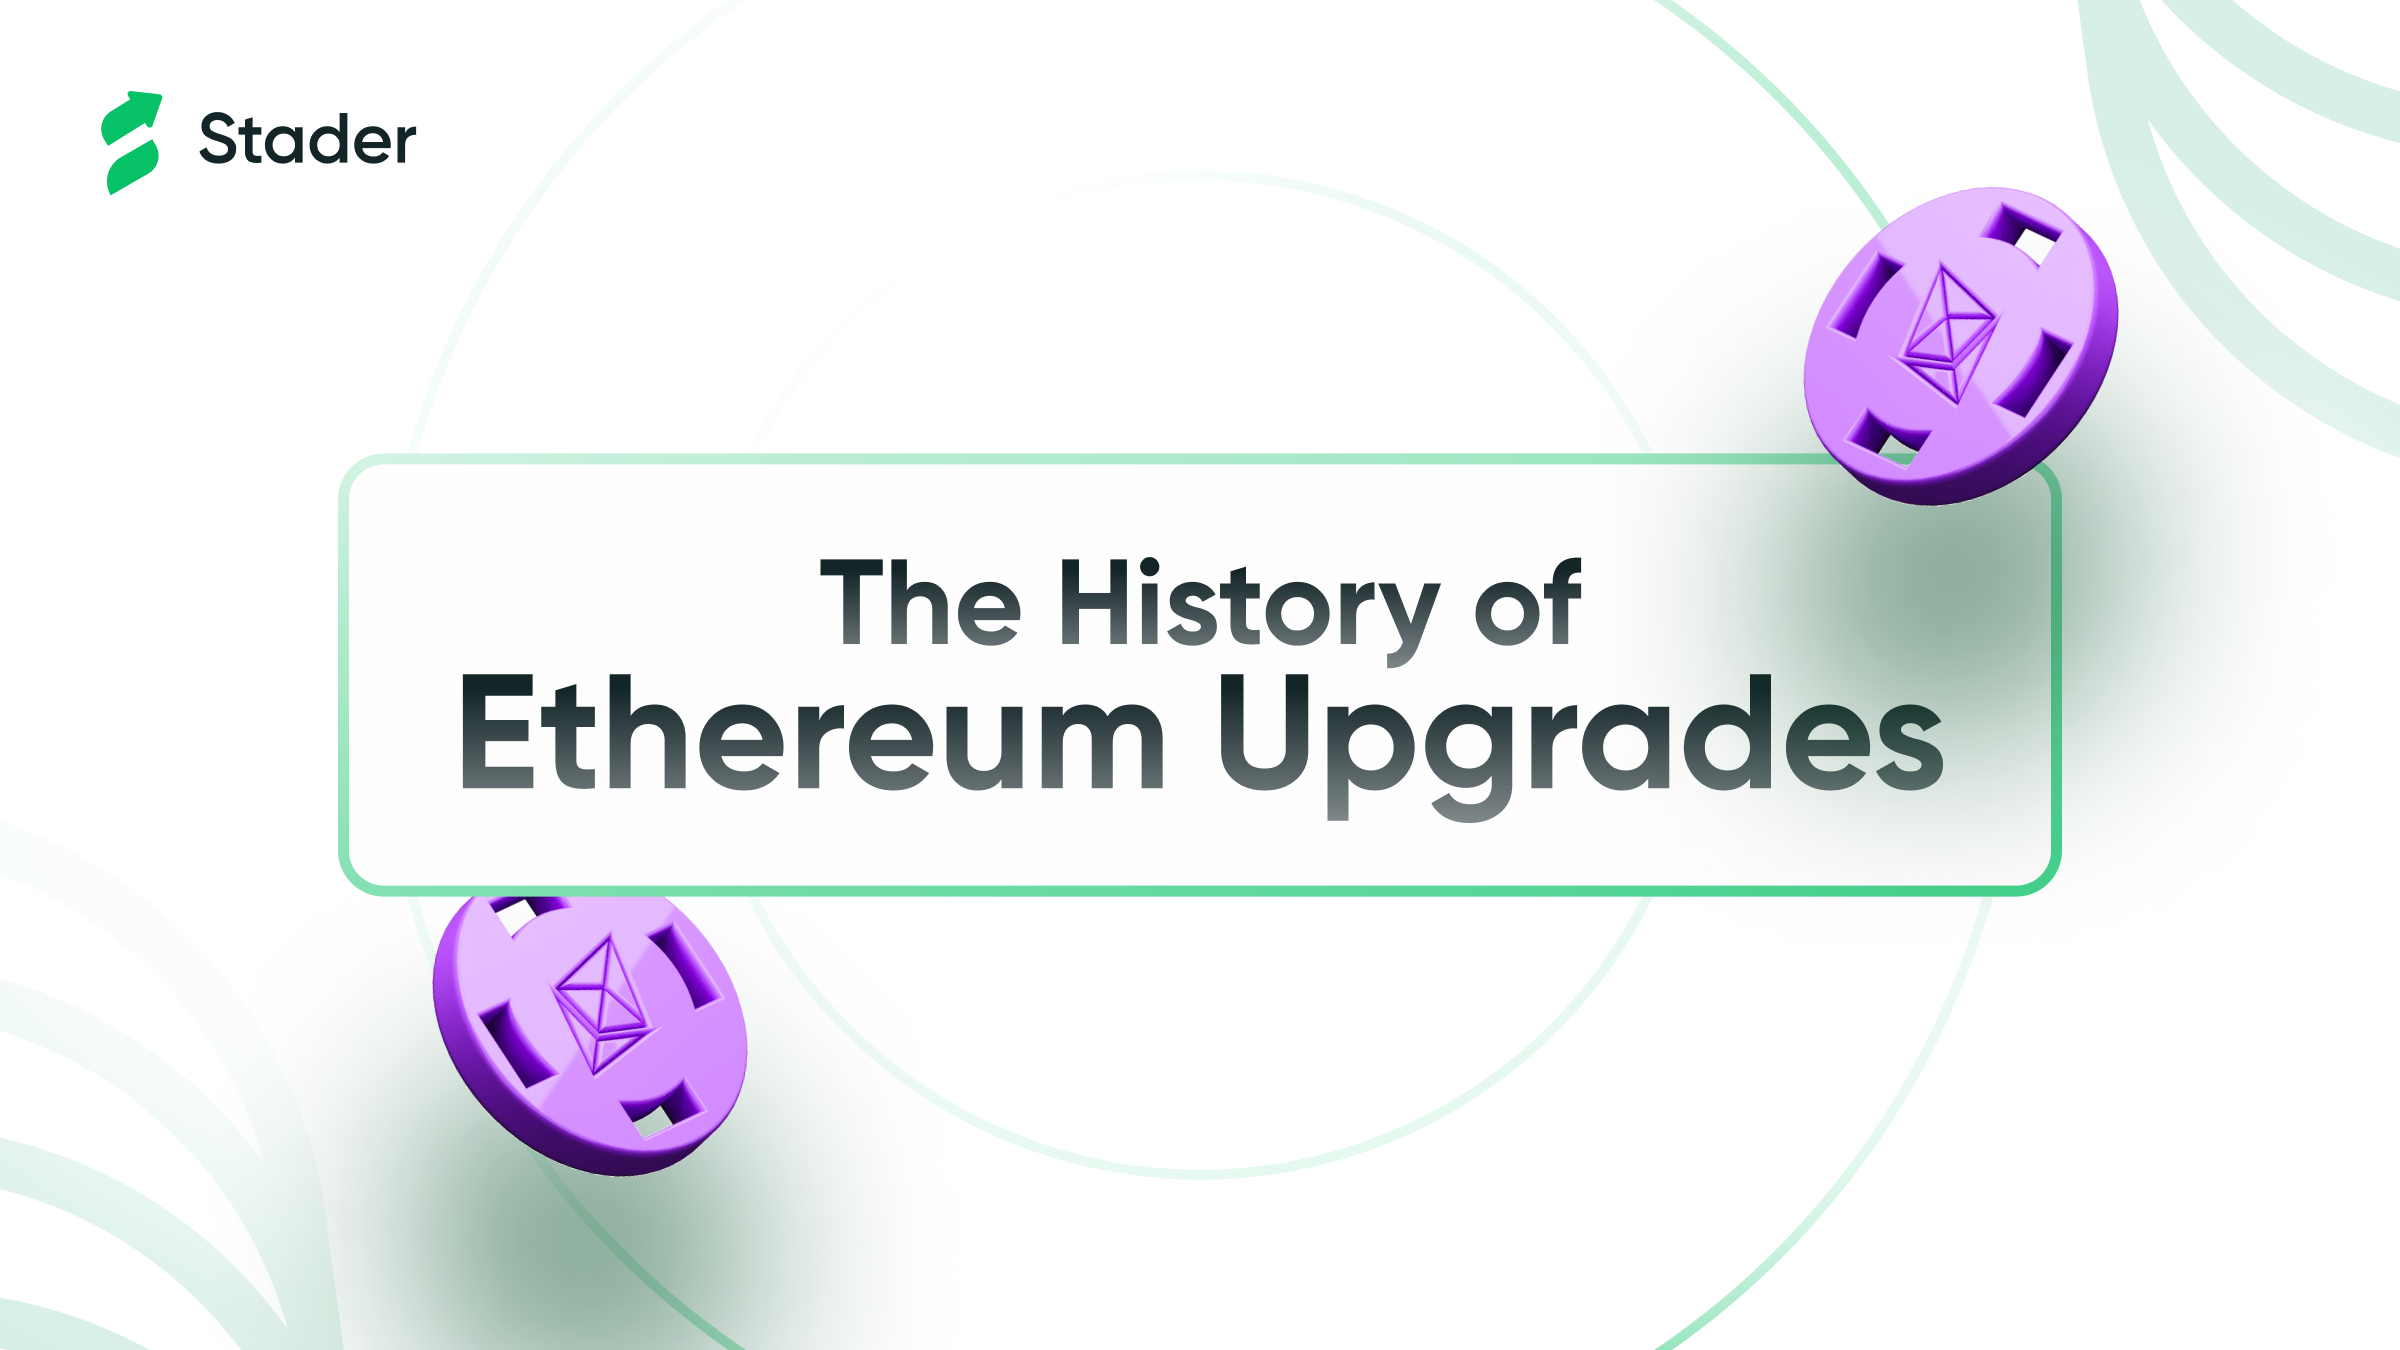 The History of Ethereum Upgrades